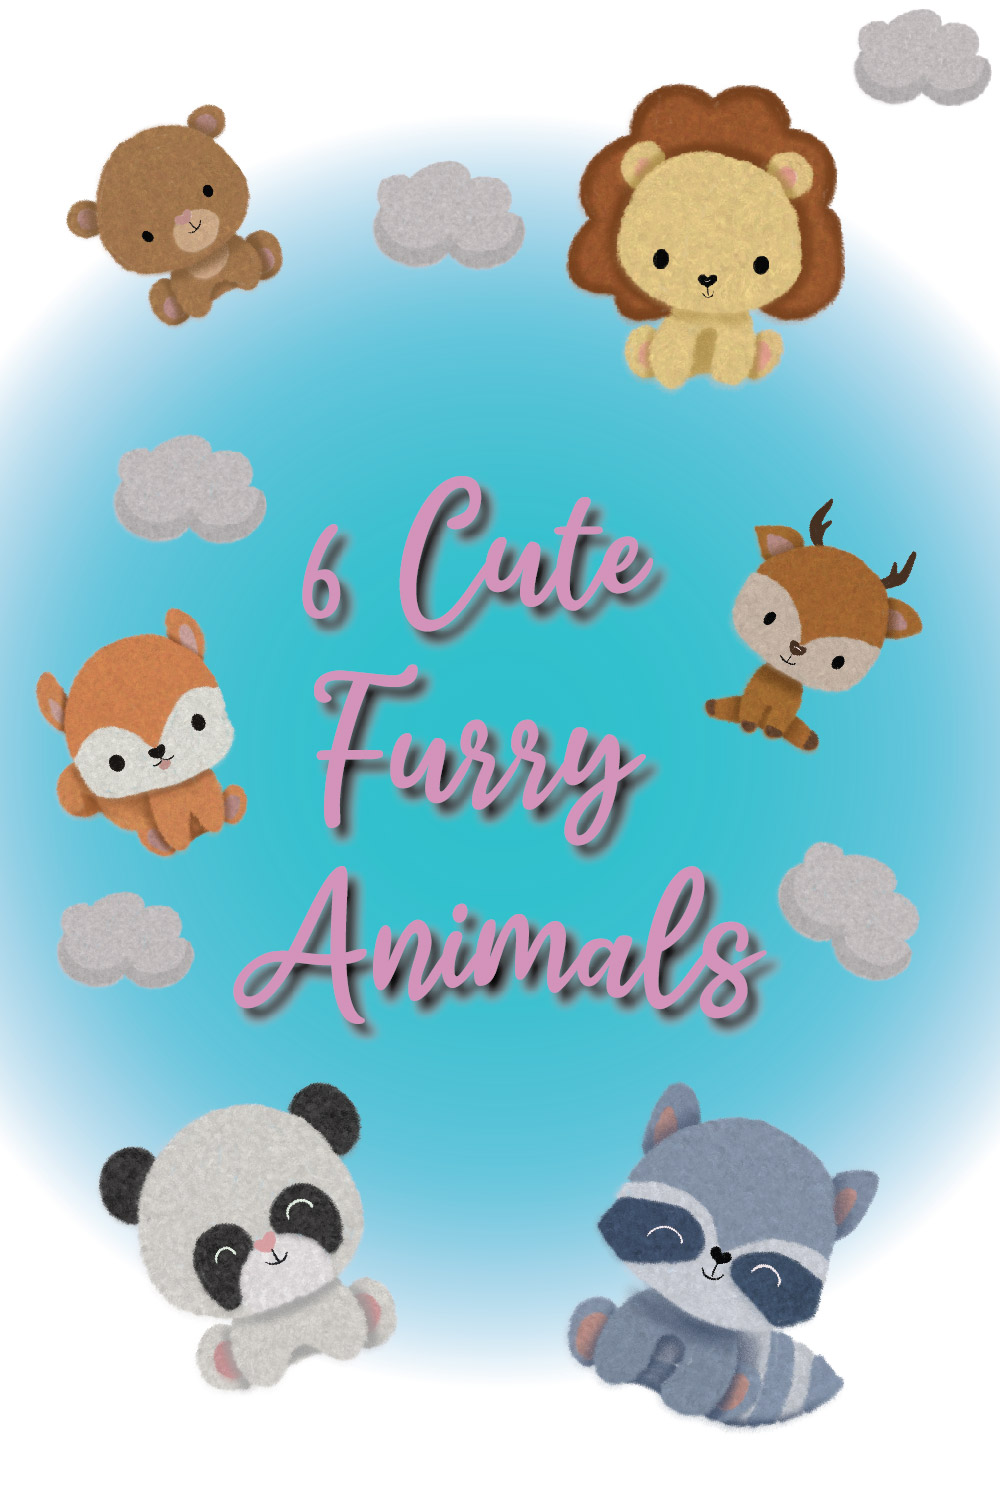 6 Cute Furry Animals Clipart - only $10 - MasterBundles